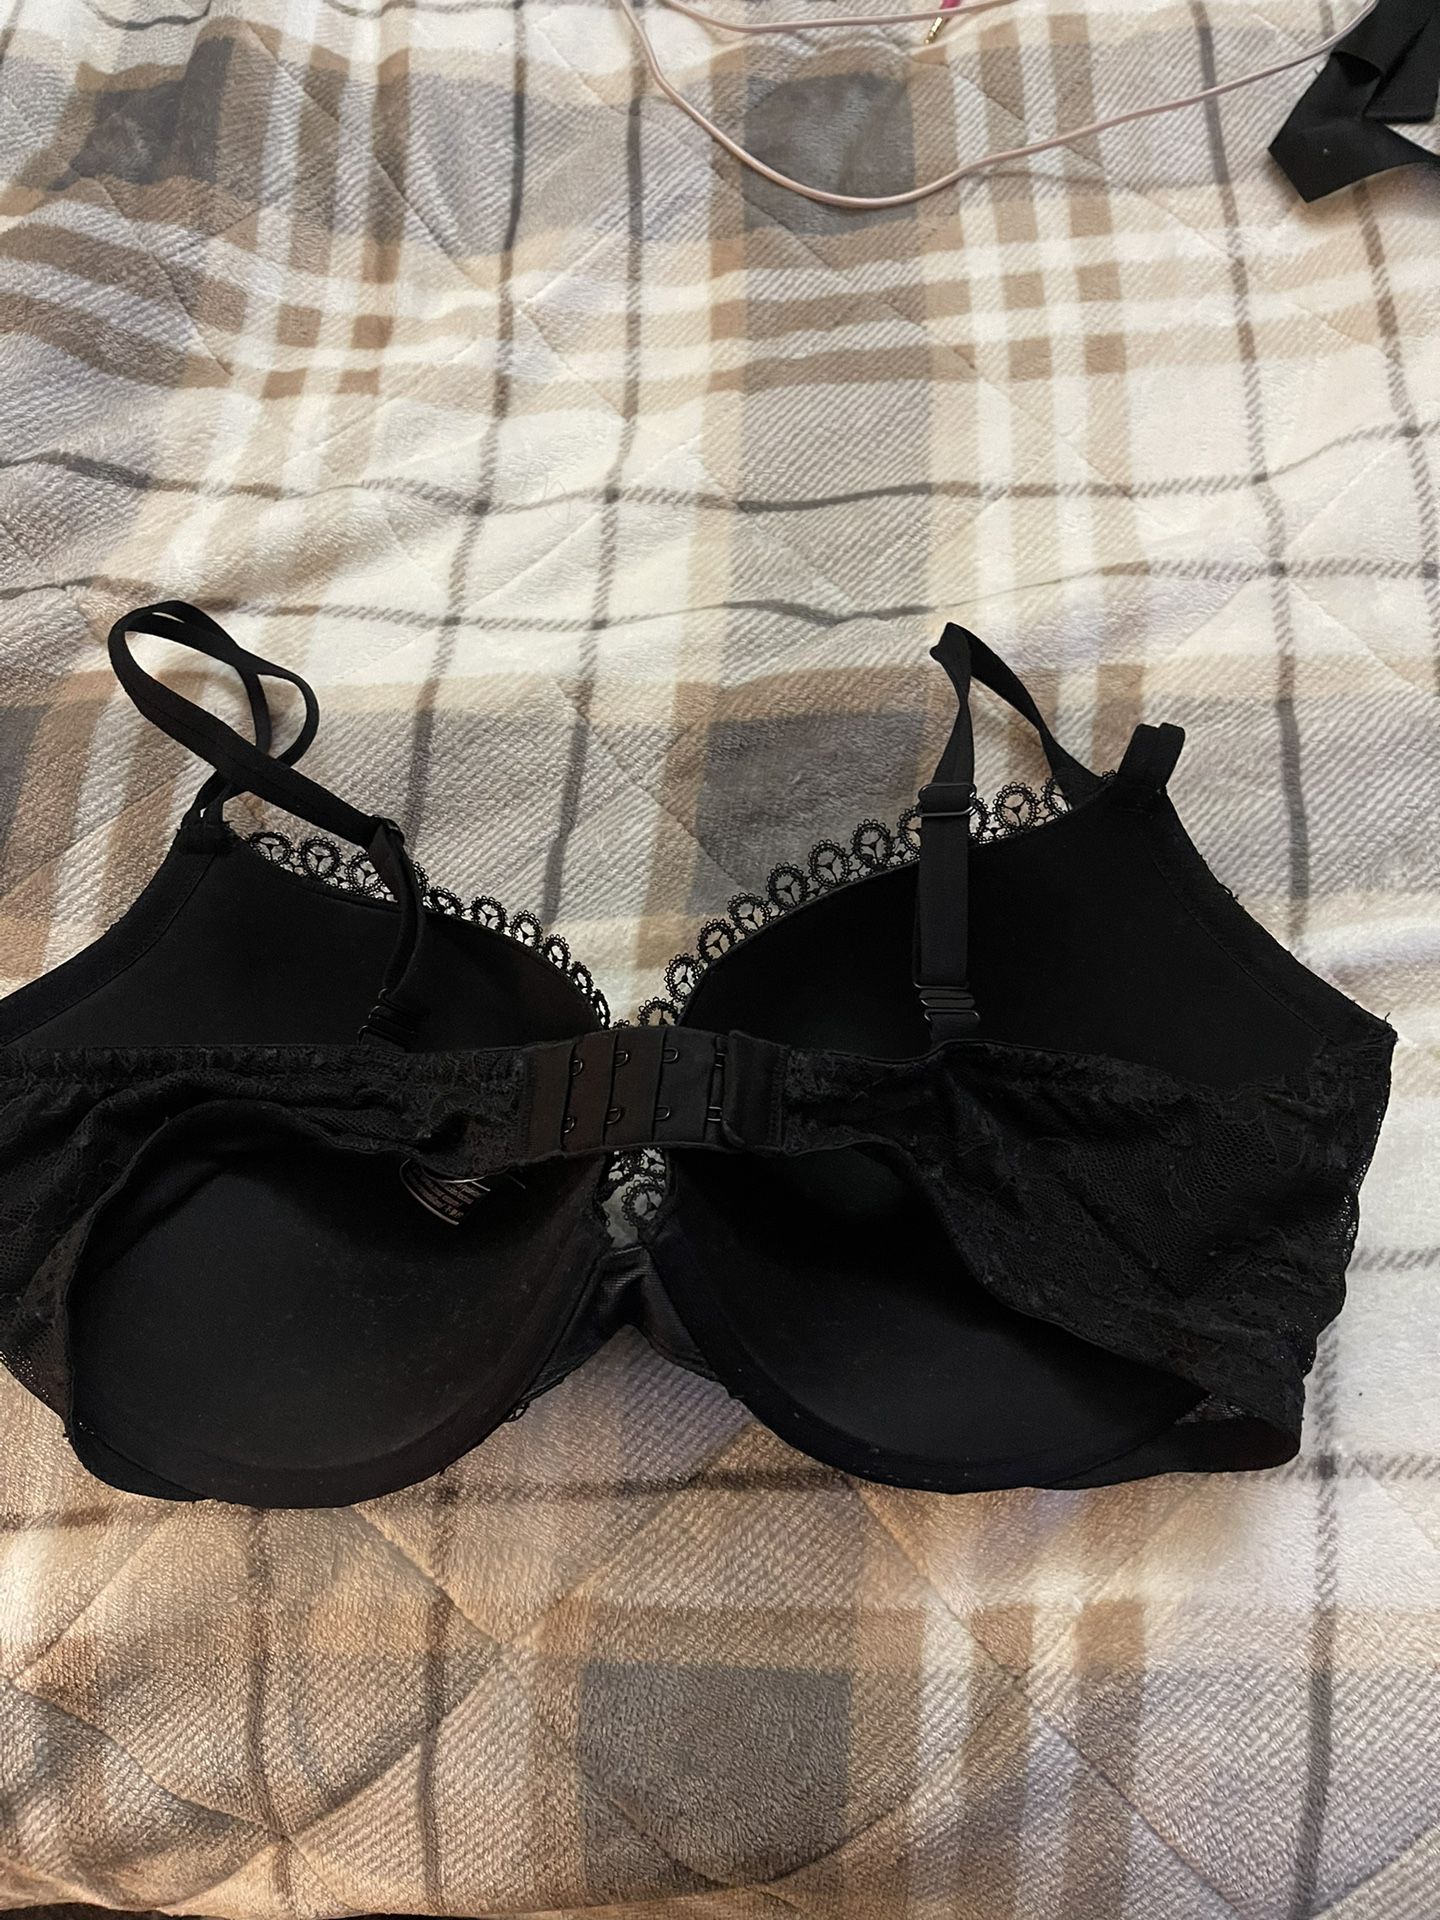 Victoria Secret very sexy push up bra in black lace with padding. Size is  38DD.